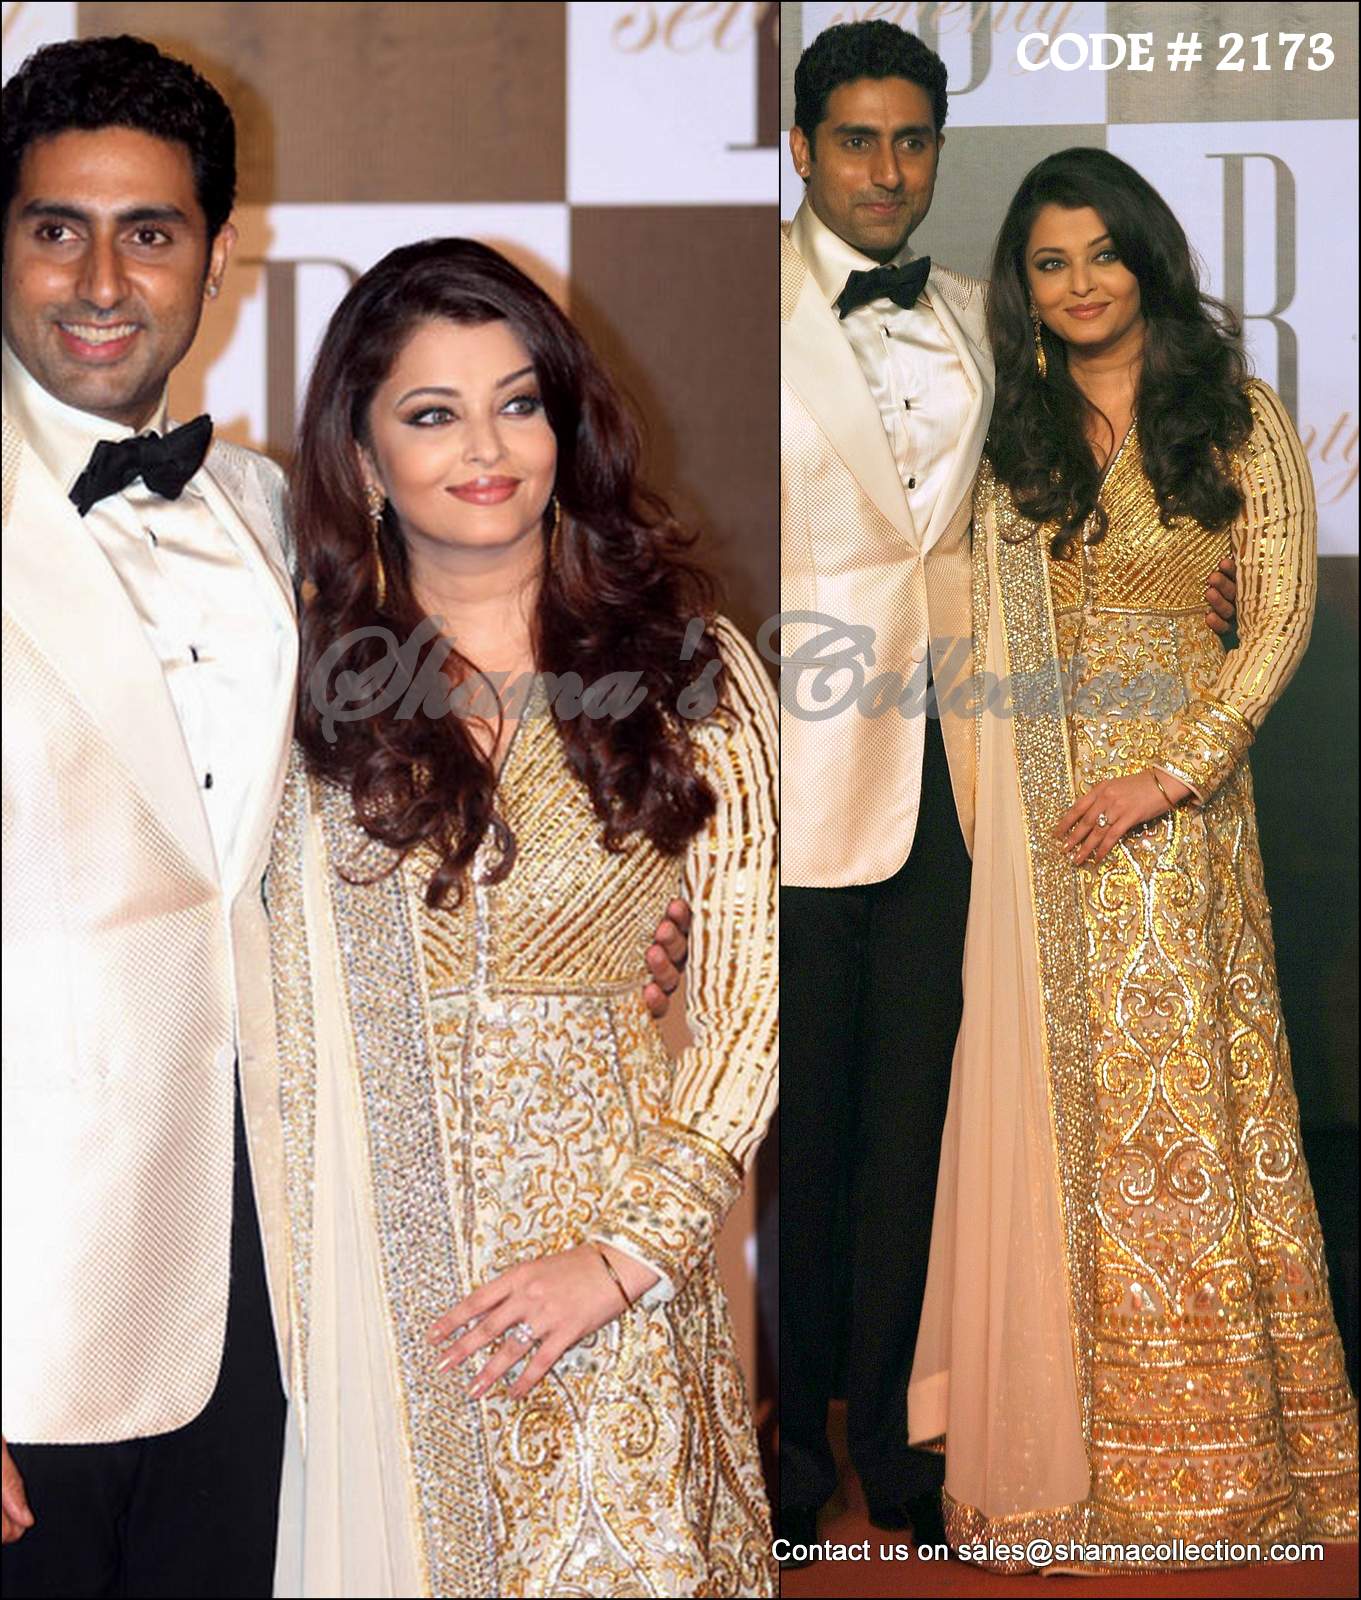 Bollywood star Aishwarya Rai dazzles in a red jewel-encrusted gown at the  Lux Golden Rose Awards | Daily Mail Online